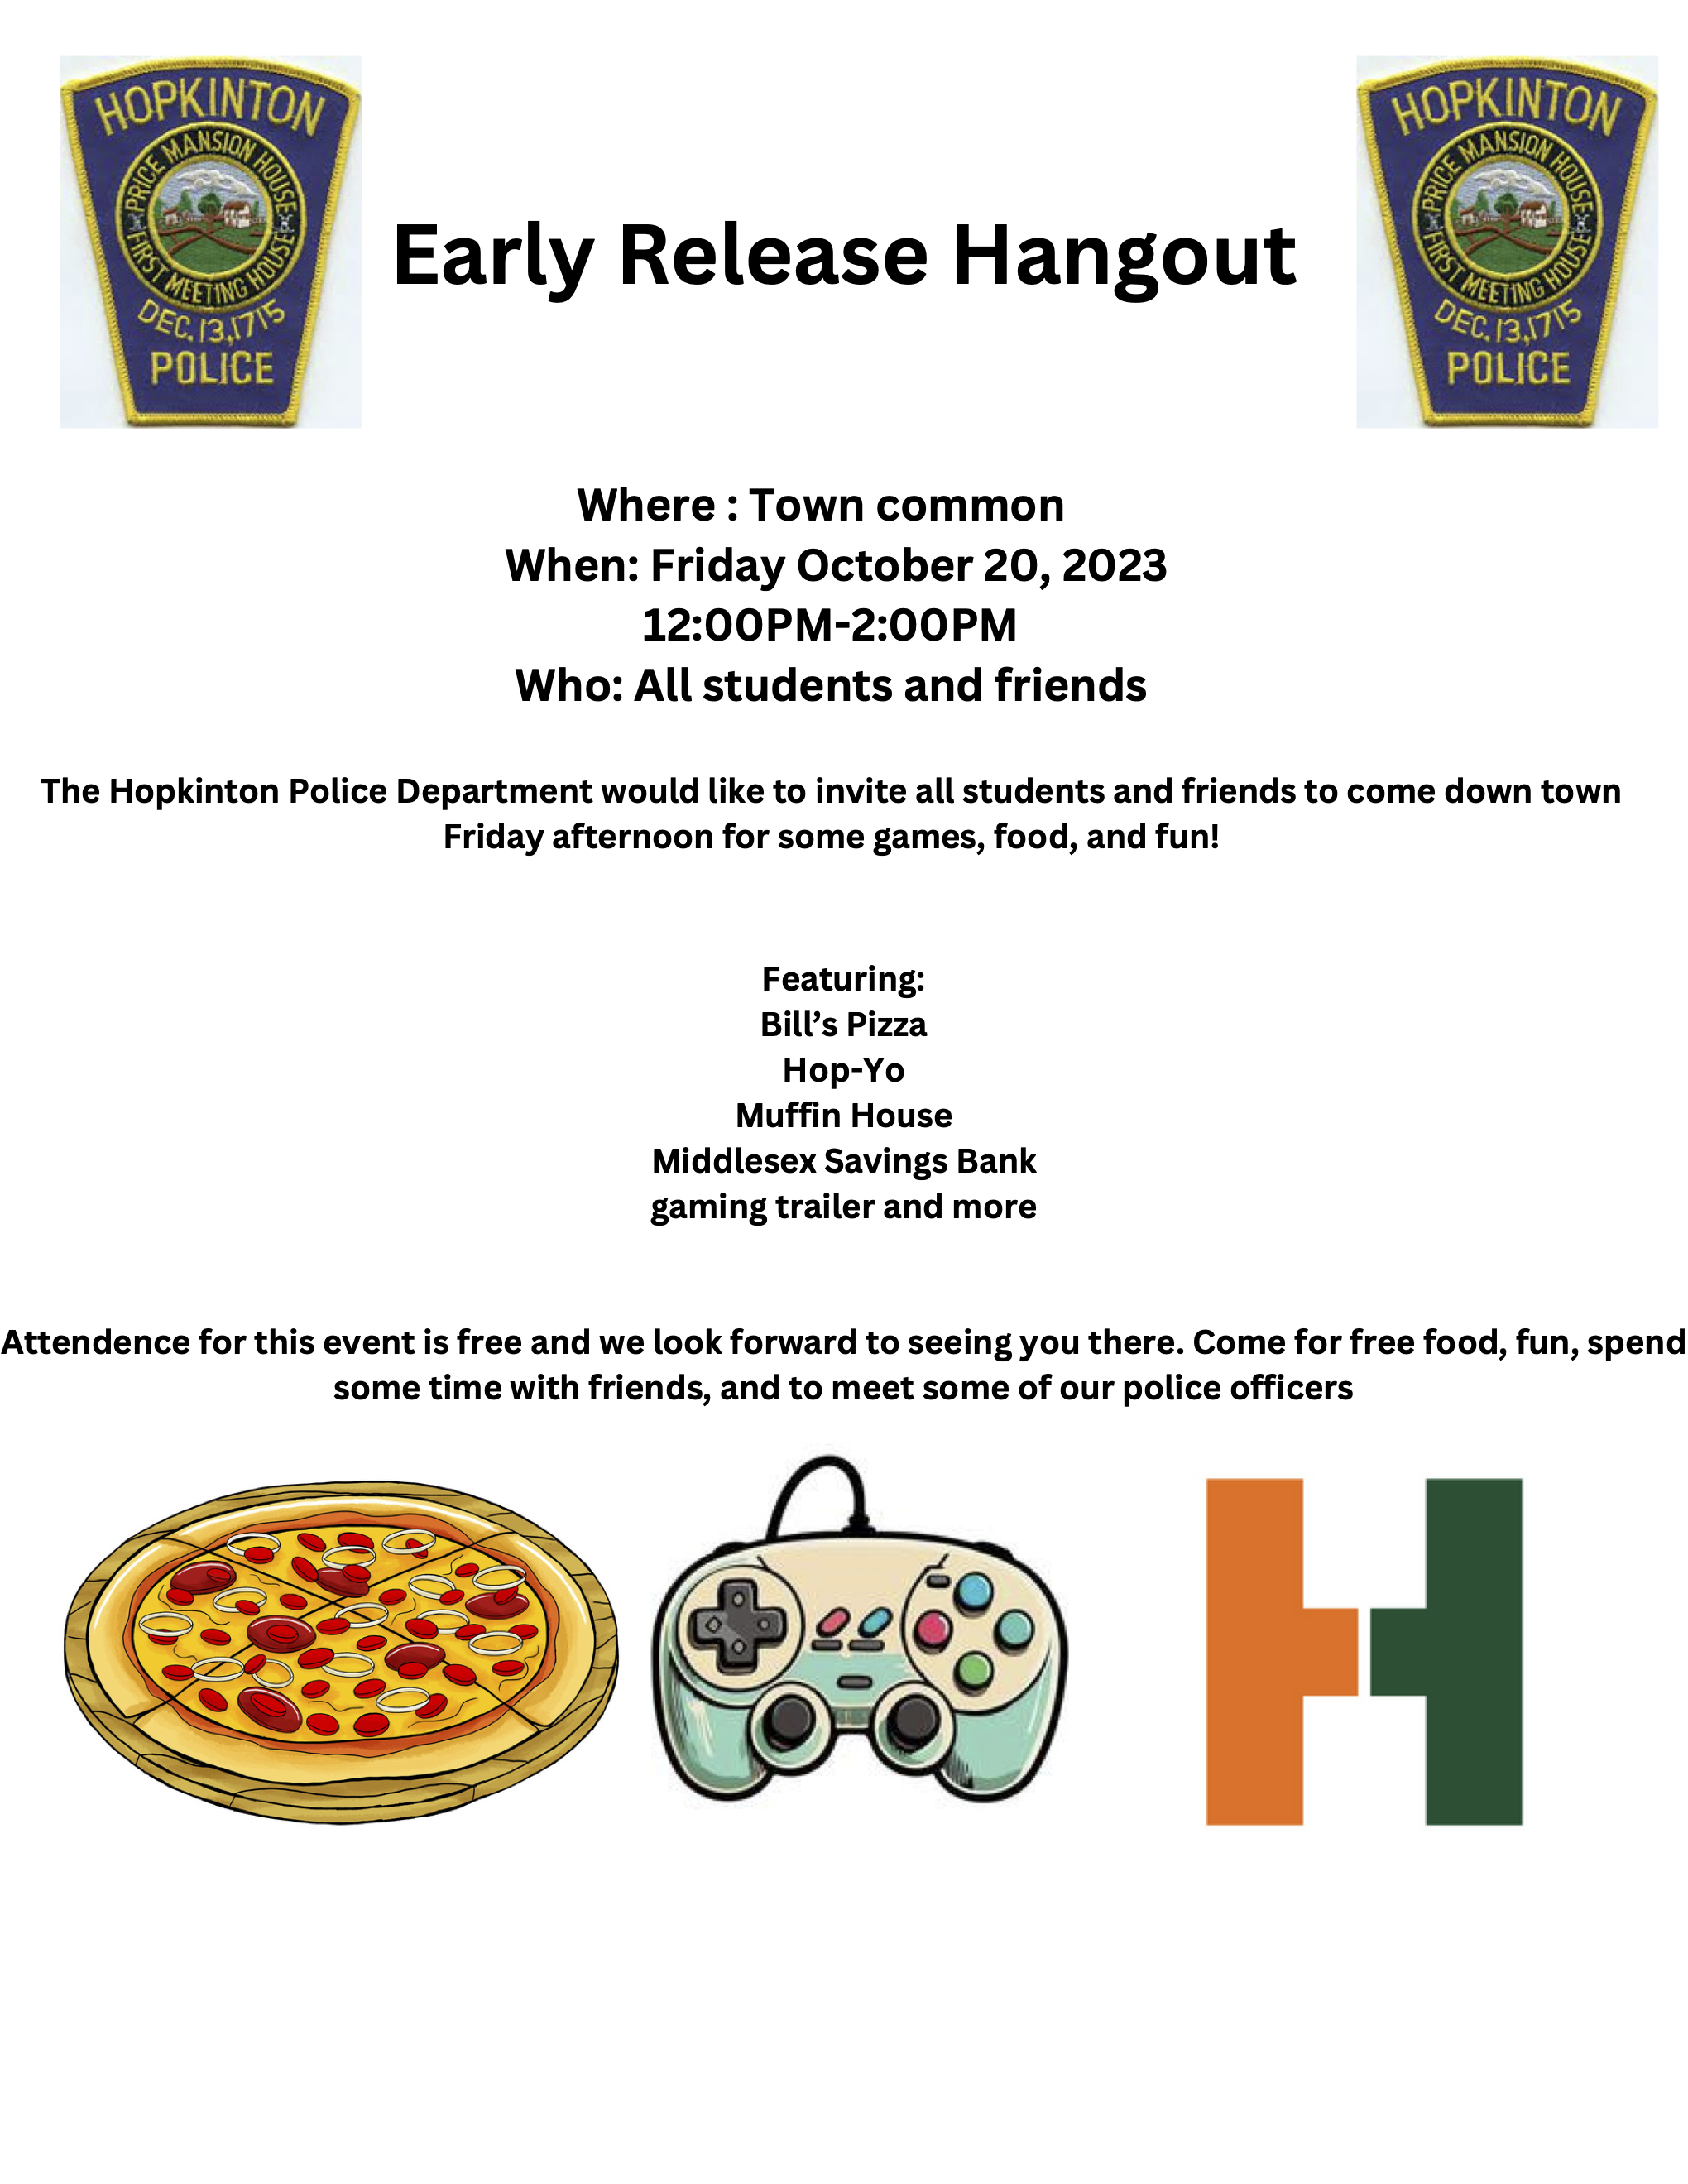 Police to host Early Release Hangout at Town Common this Friday